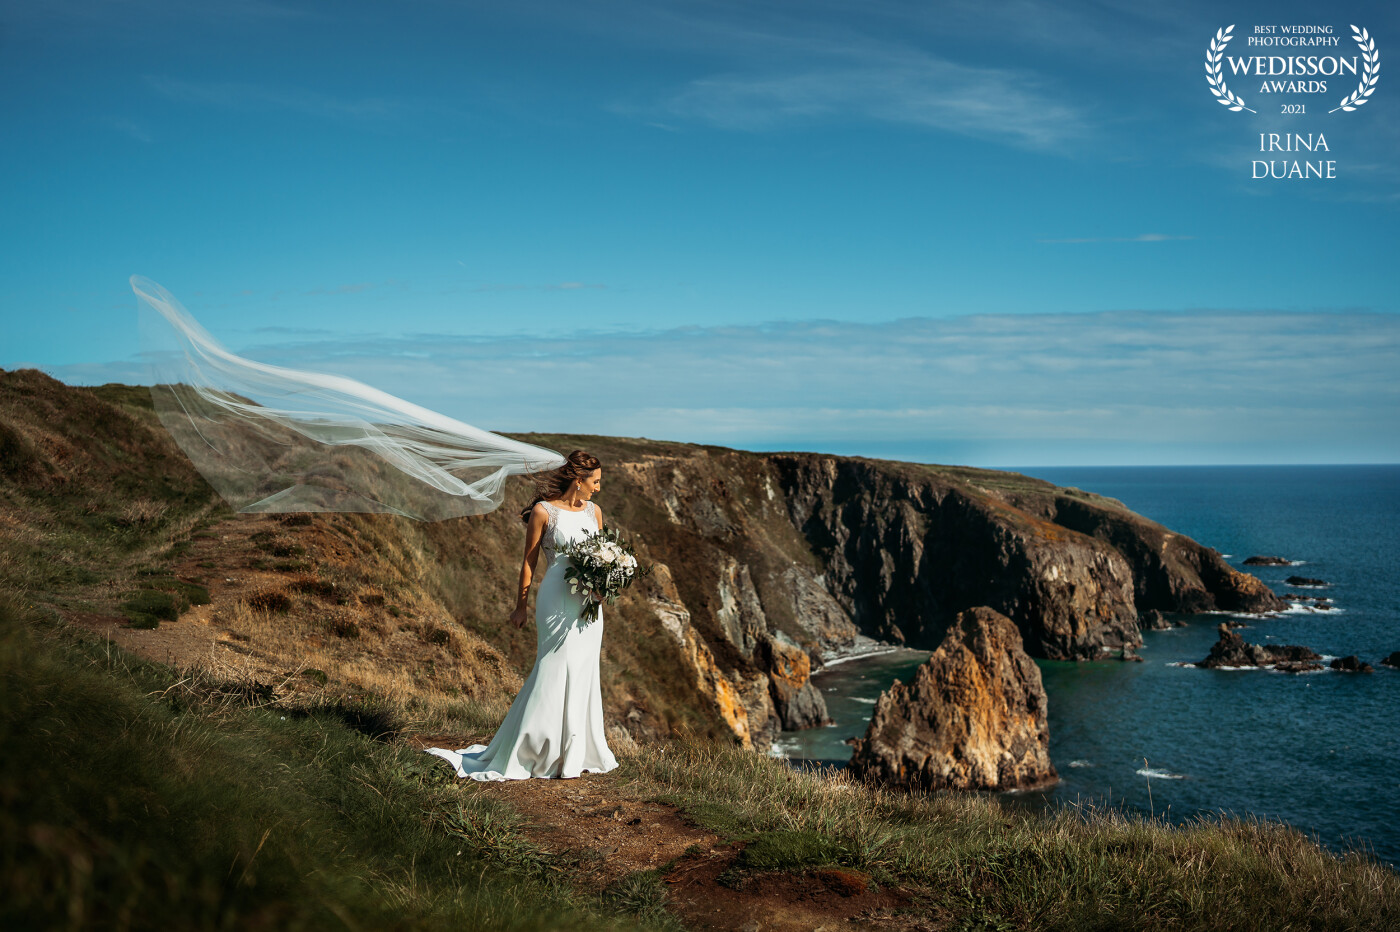 UNESCO Geopark also known as The Copper Coast in County Waterford is famous for its panoramic seascapes, coves, bays and cliffs. The Copper Coast is something that must not be missed on if you are getting married in co. Waterford Ireland.